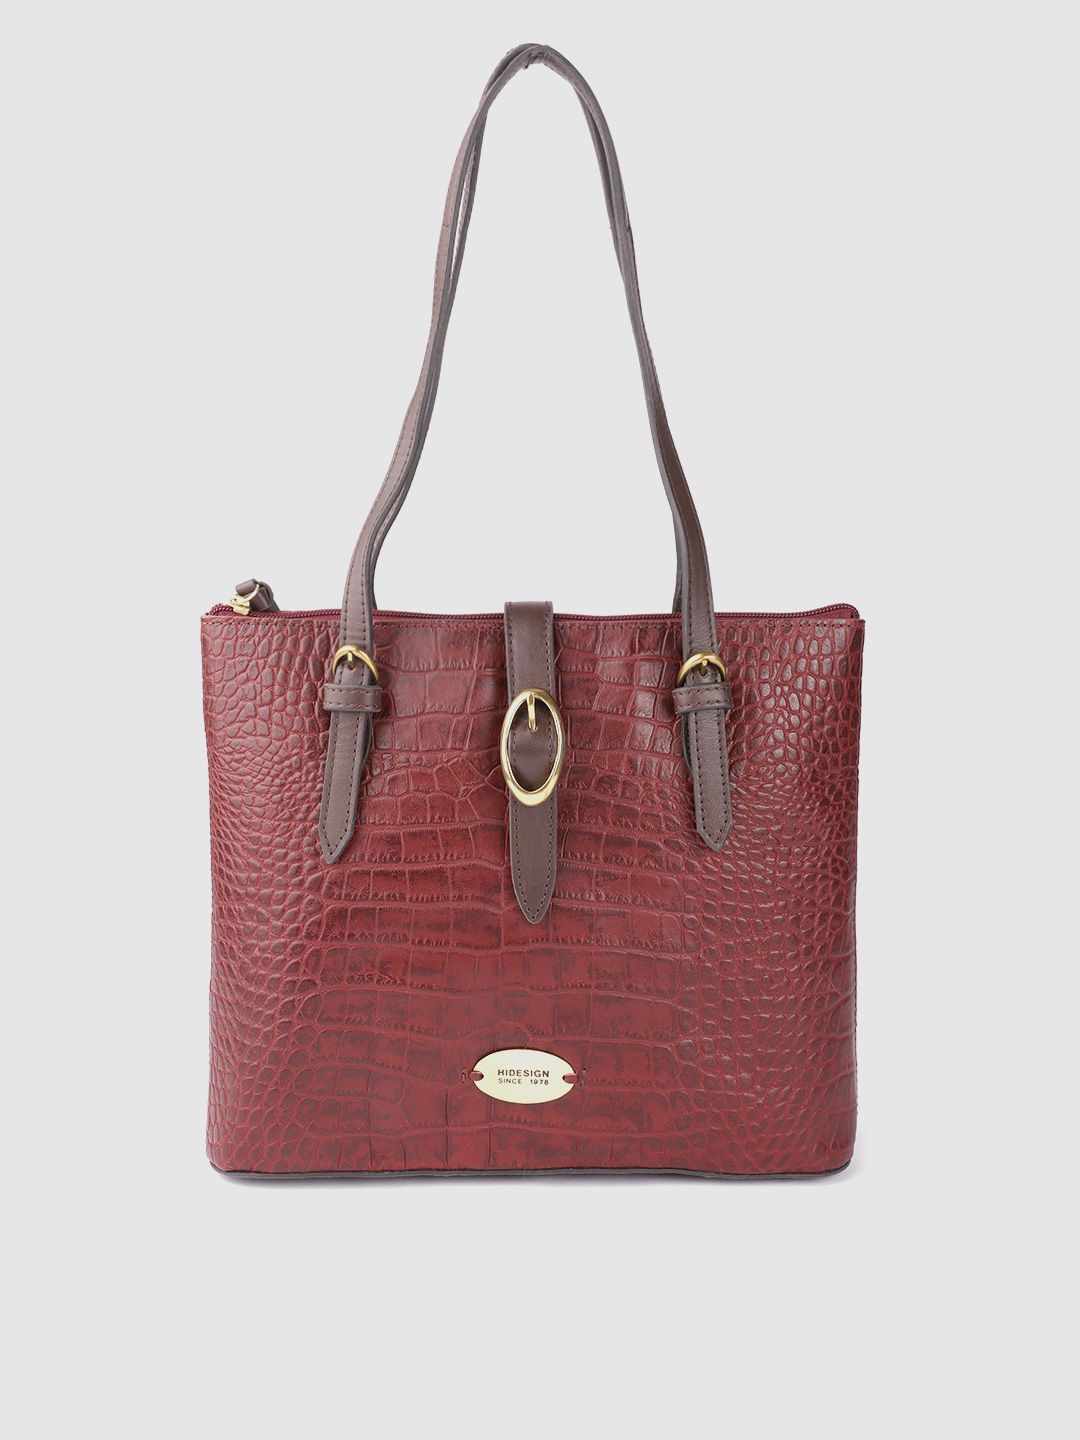 Hidesign Burgundy Handcrafted Croc Textured Leather Structured Shoulder Bag Price in India